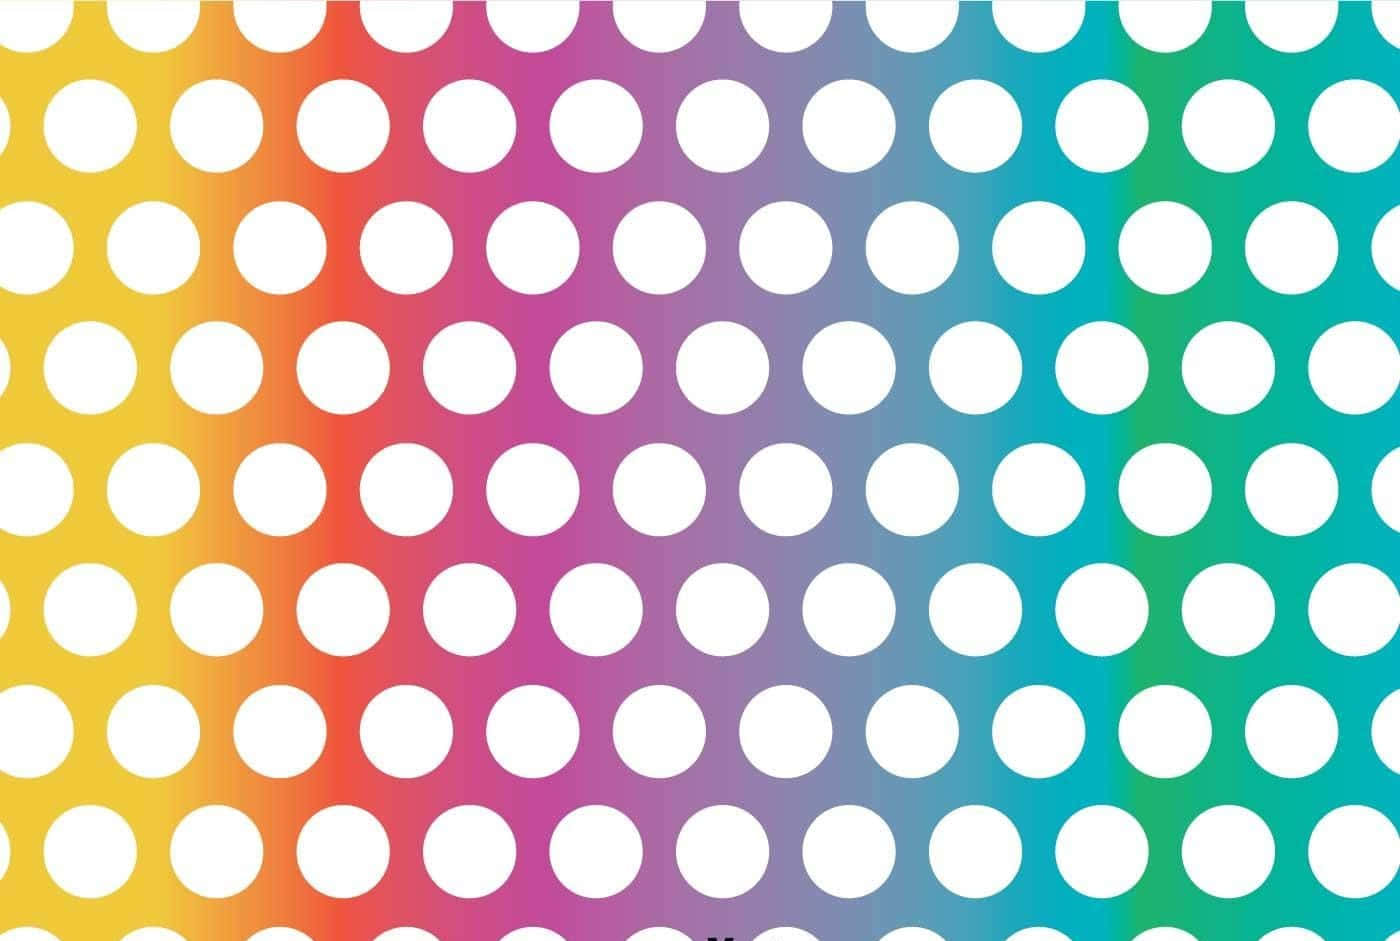 A Rainbow Polka Dot Pattern With White Dots